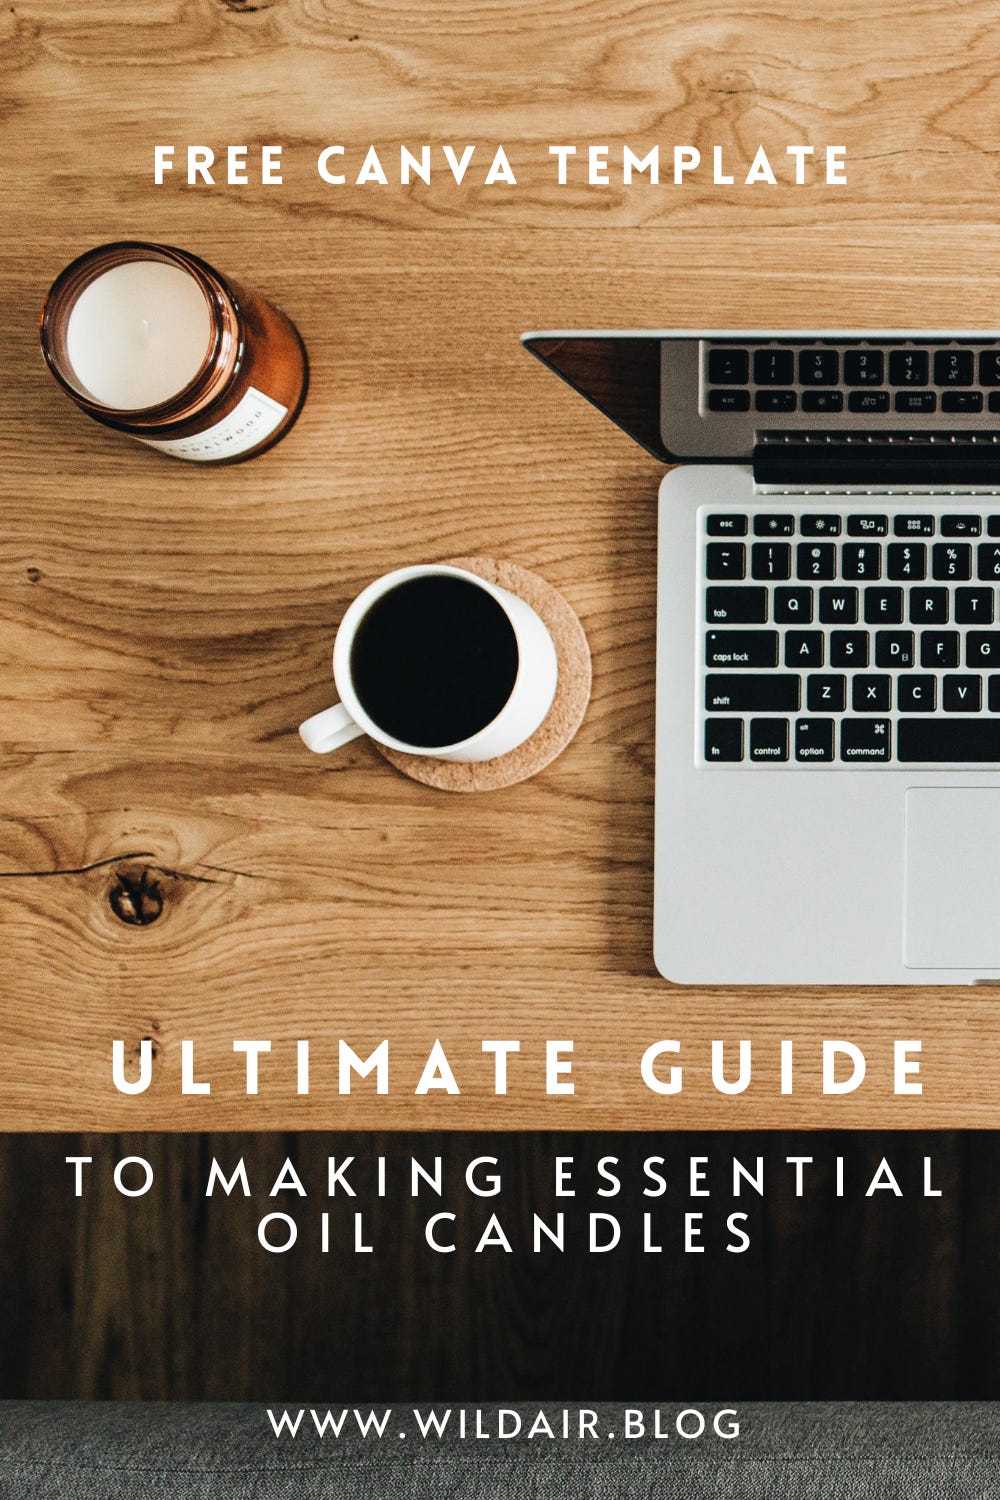 Tired of searching the internet for exactly how to make essential oil candles? In this ultimate guide you will learn everything you need to know about creating beautiful essential oil candles from a candlemaker herself. You will learn what is the co…